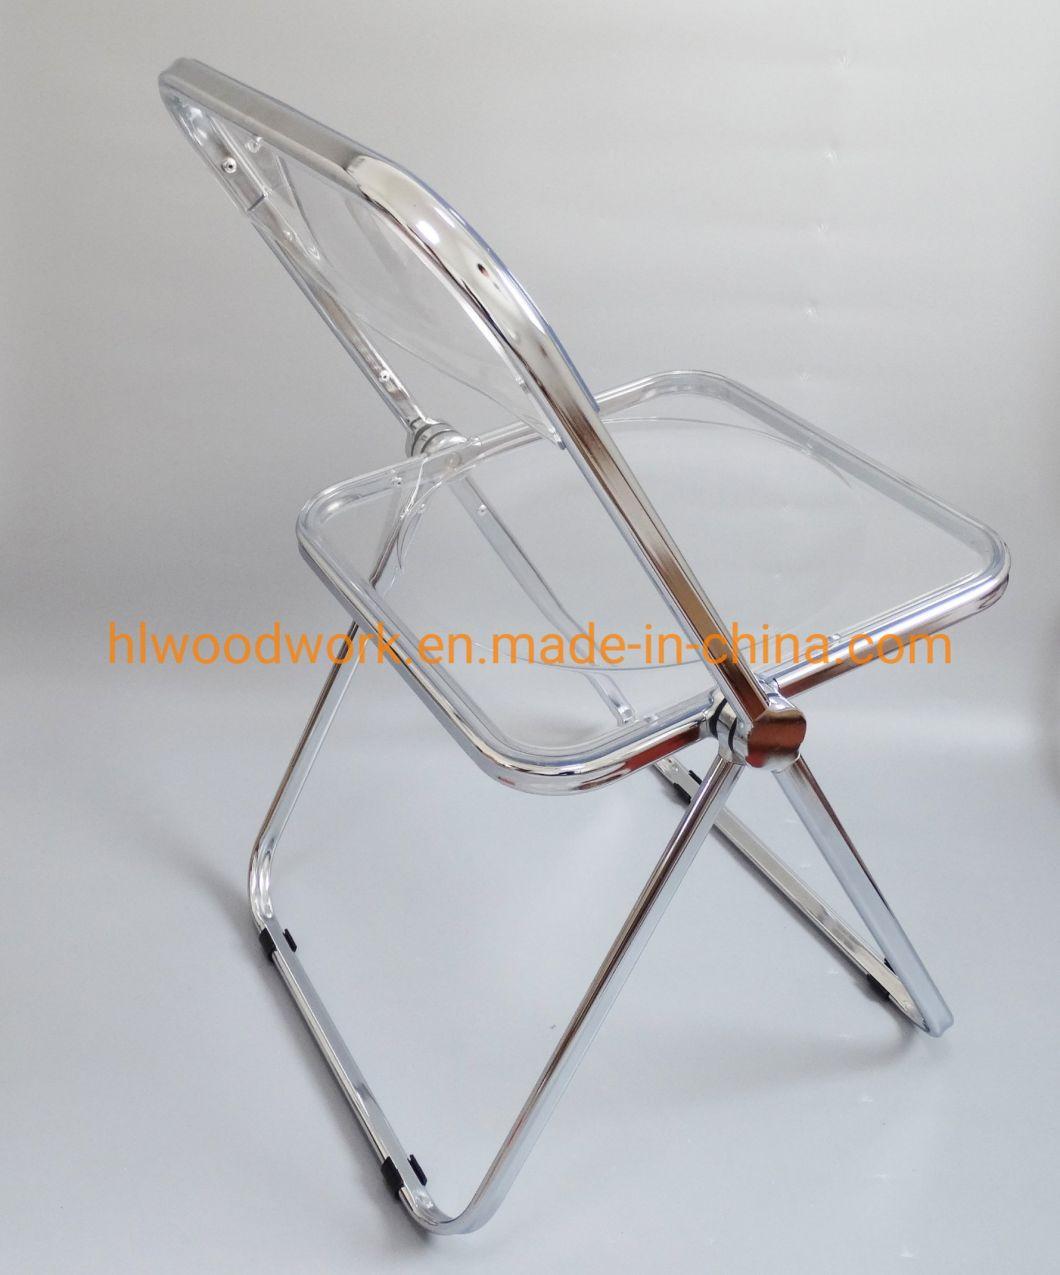 Modern Grey Plastic Folded Chair Office/Bar/Dining/Leisure/Banquet/Wedding/Meeting Chair in Chrome Frame Transparent Clear PC Plastic Dining Chair